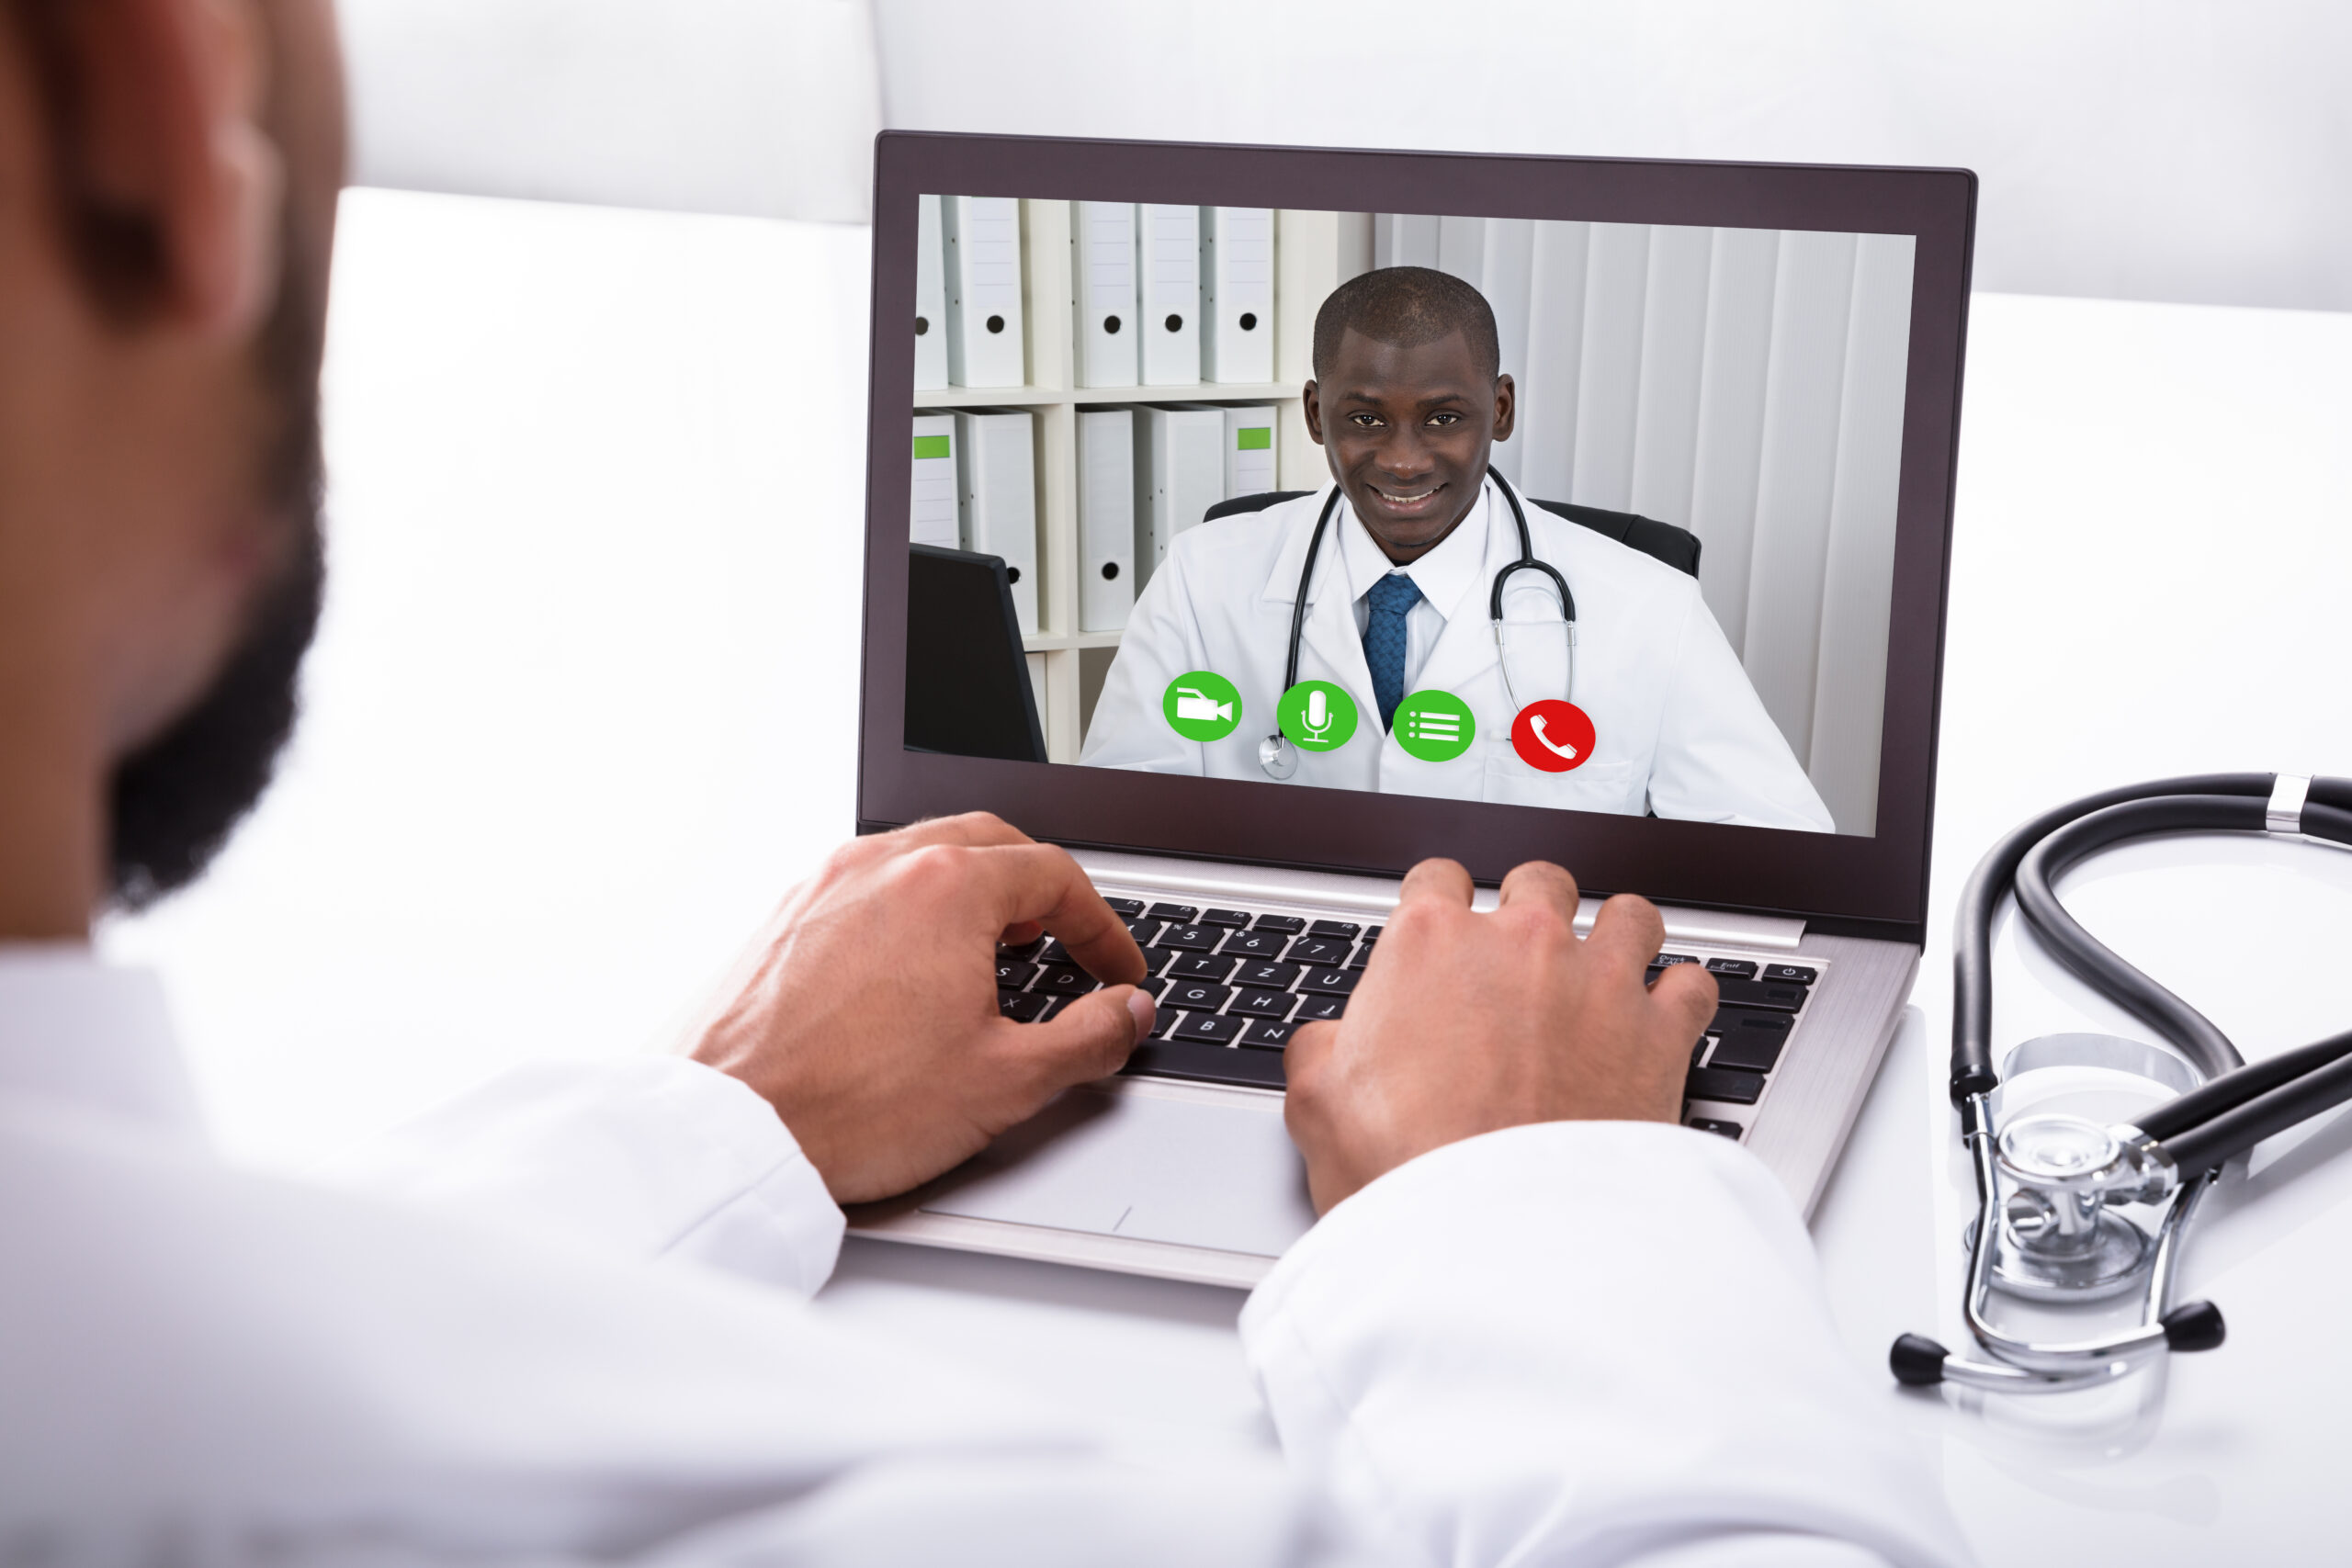 Professional south African Doctor seeing a patient on a zoom call